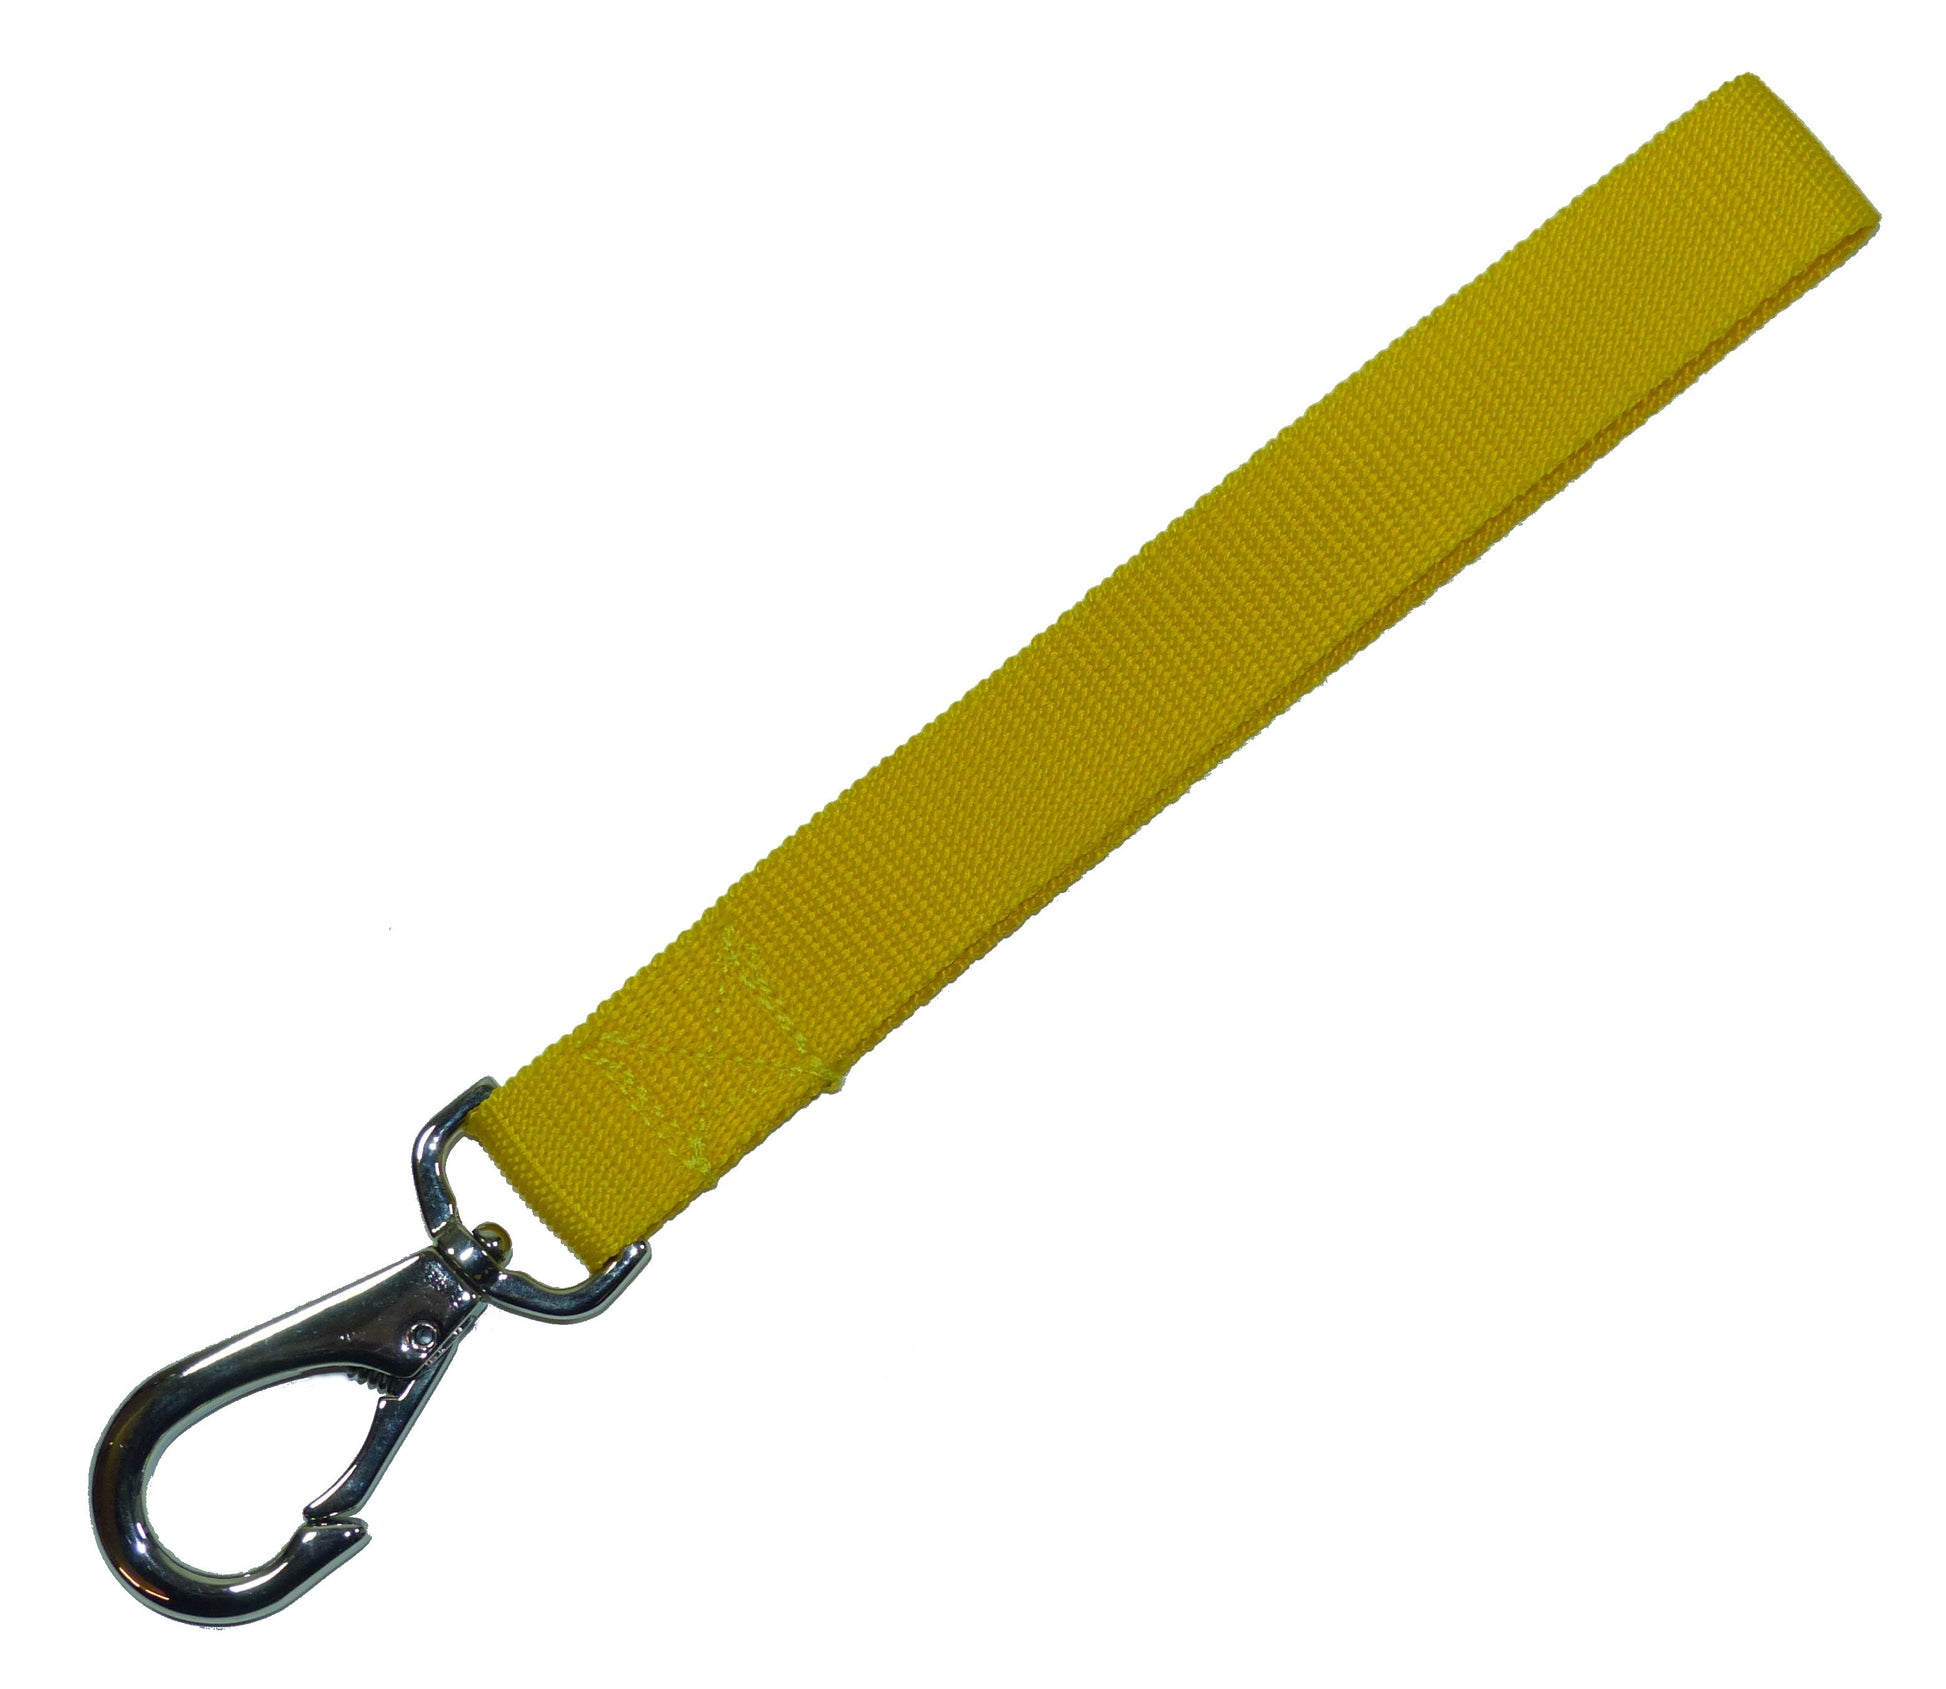 25mm Buggy Handle Carry Strap in yellow